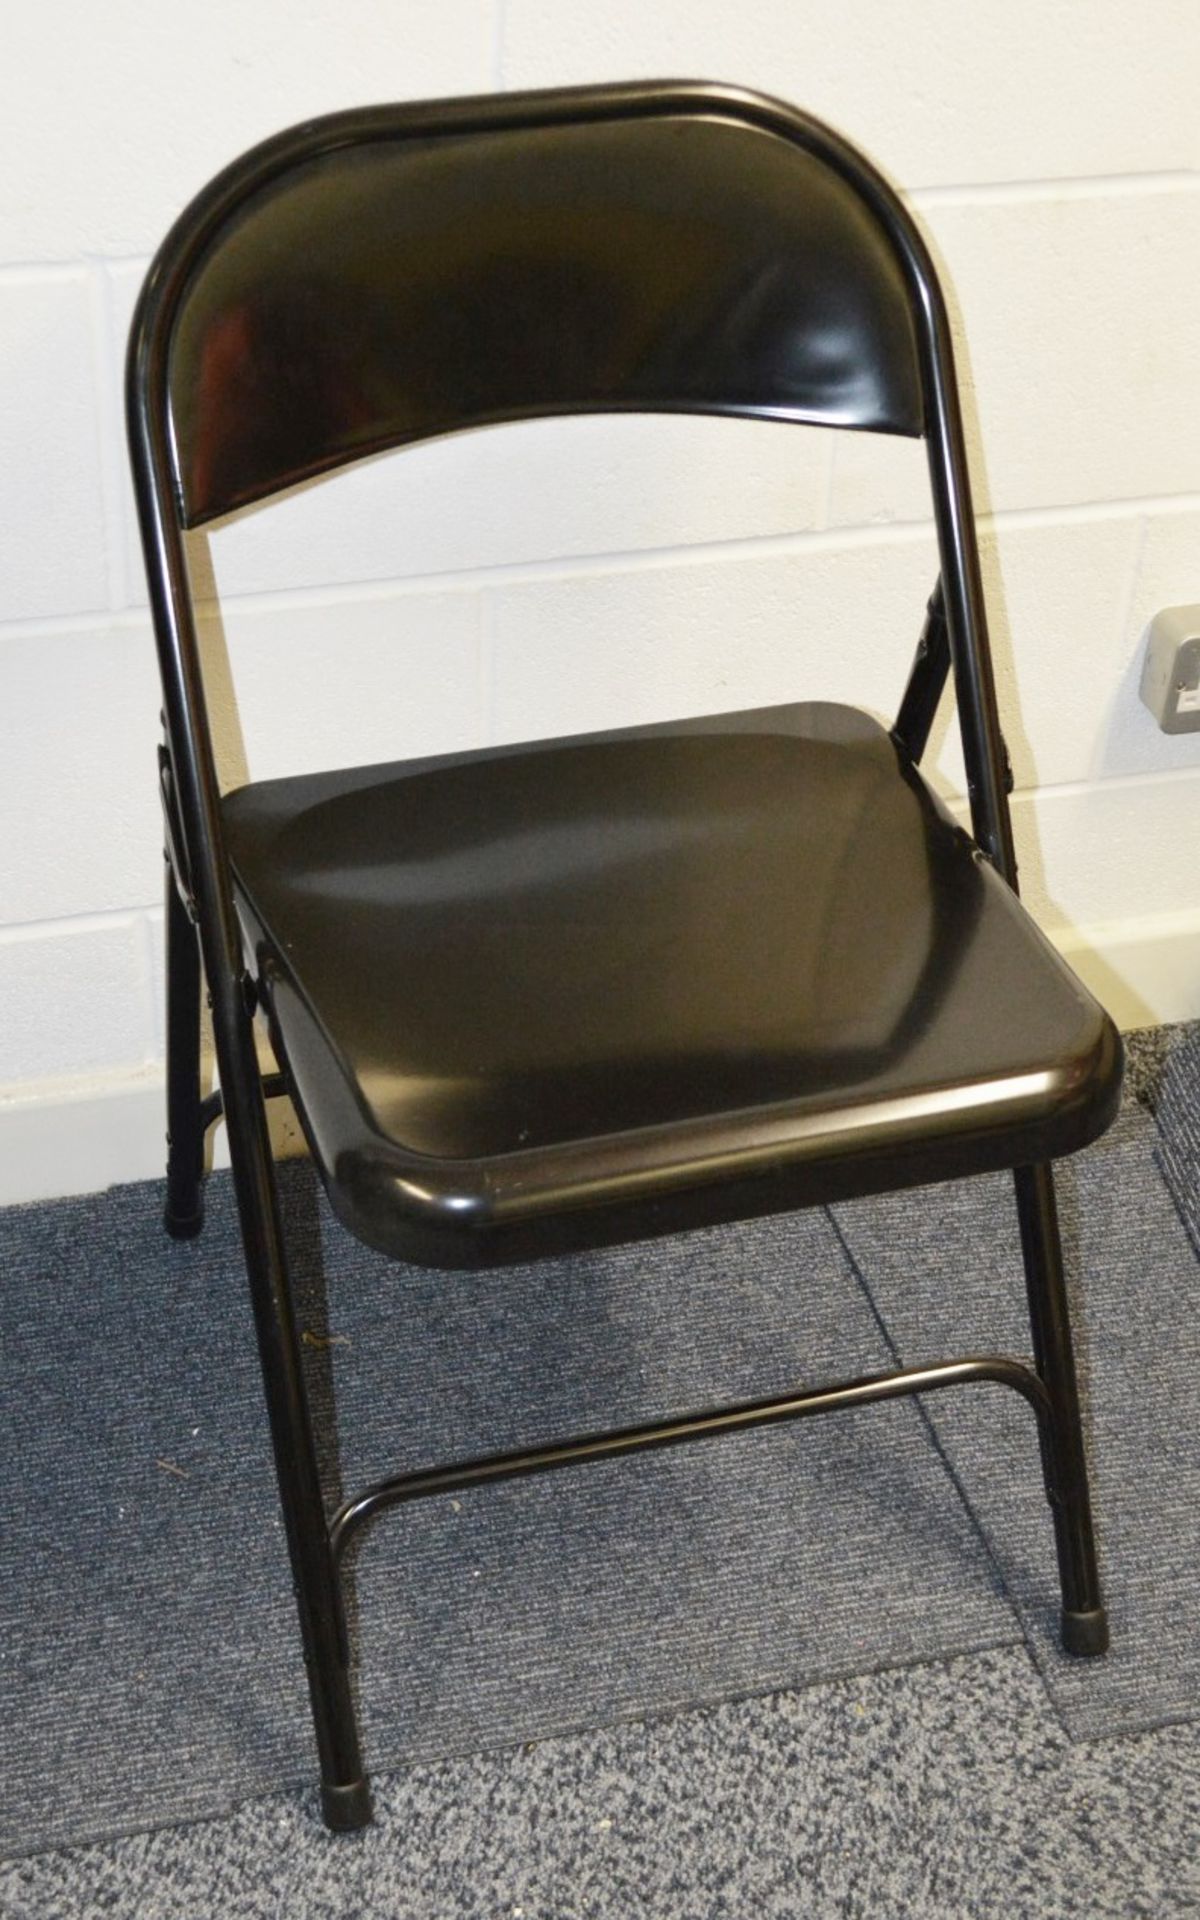 3 x HABITAT Folding Metal Chairs In Black - Dimensions: W47 x D50 x H80, Seat Height cm - Used, In